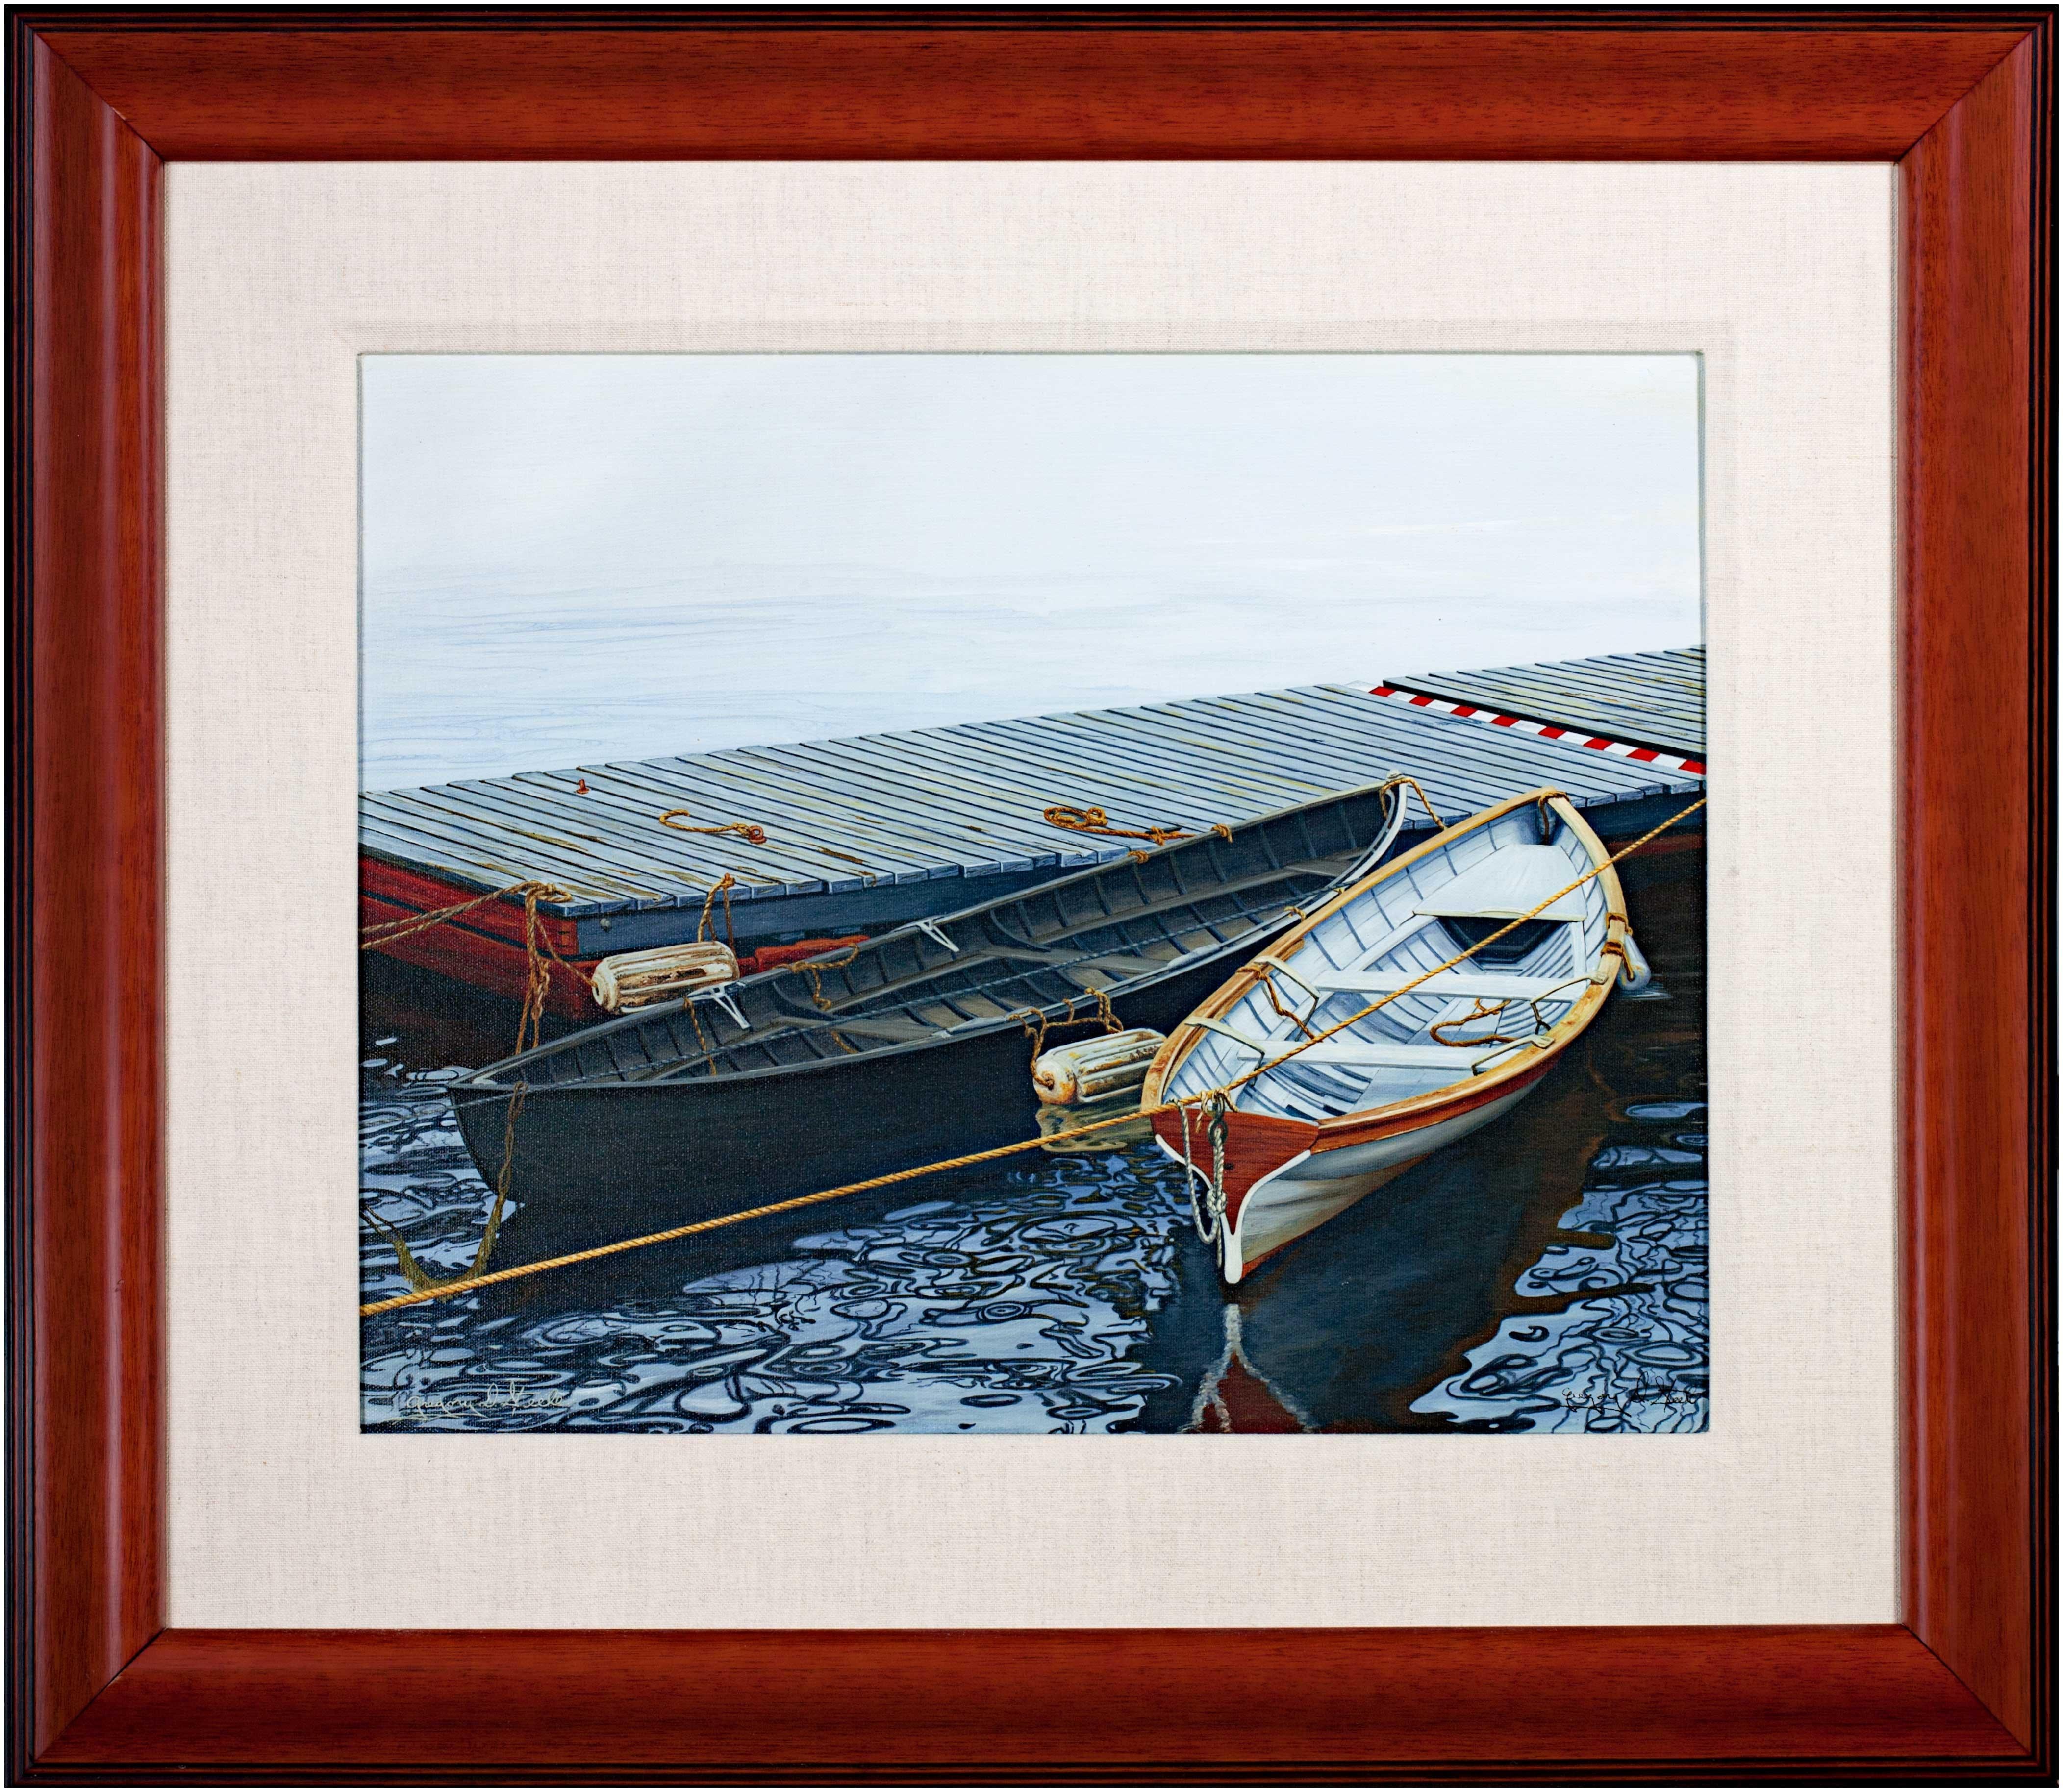 Gregory D. Steele Landscape Print - 'Boats at Camdon' giclee print on canvas after 1998 oil